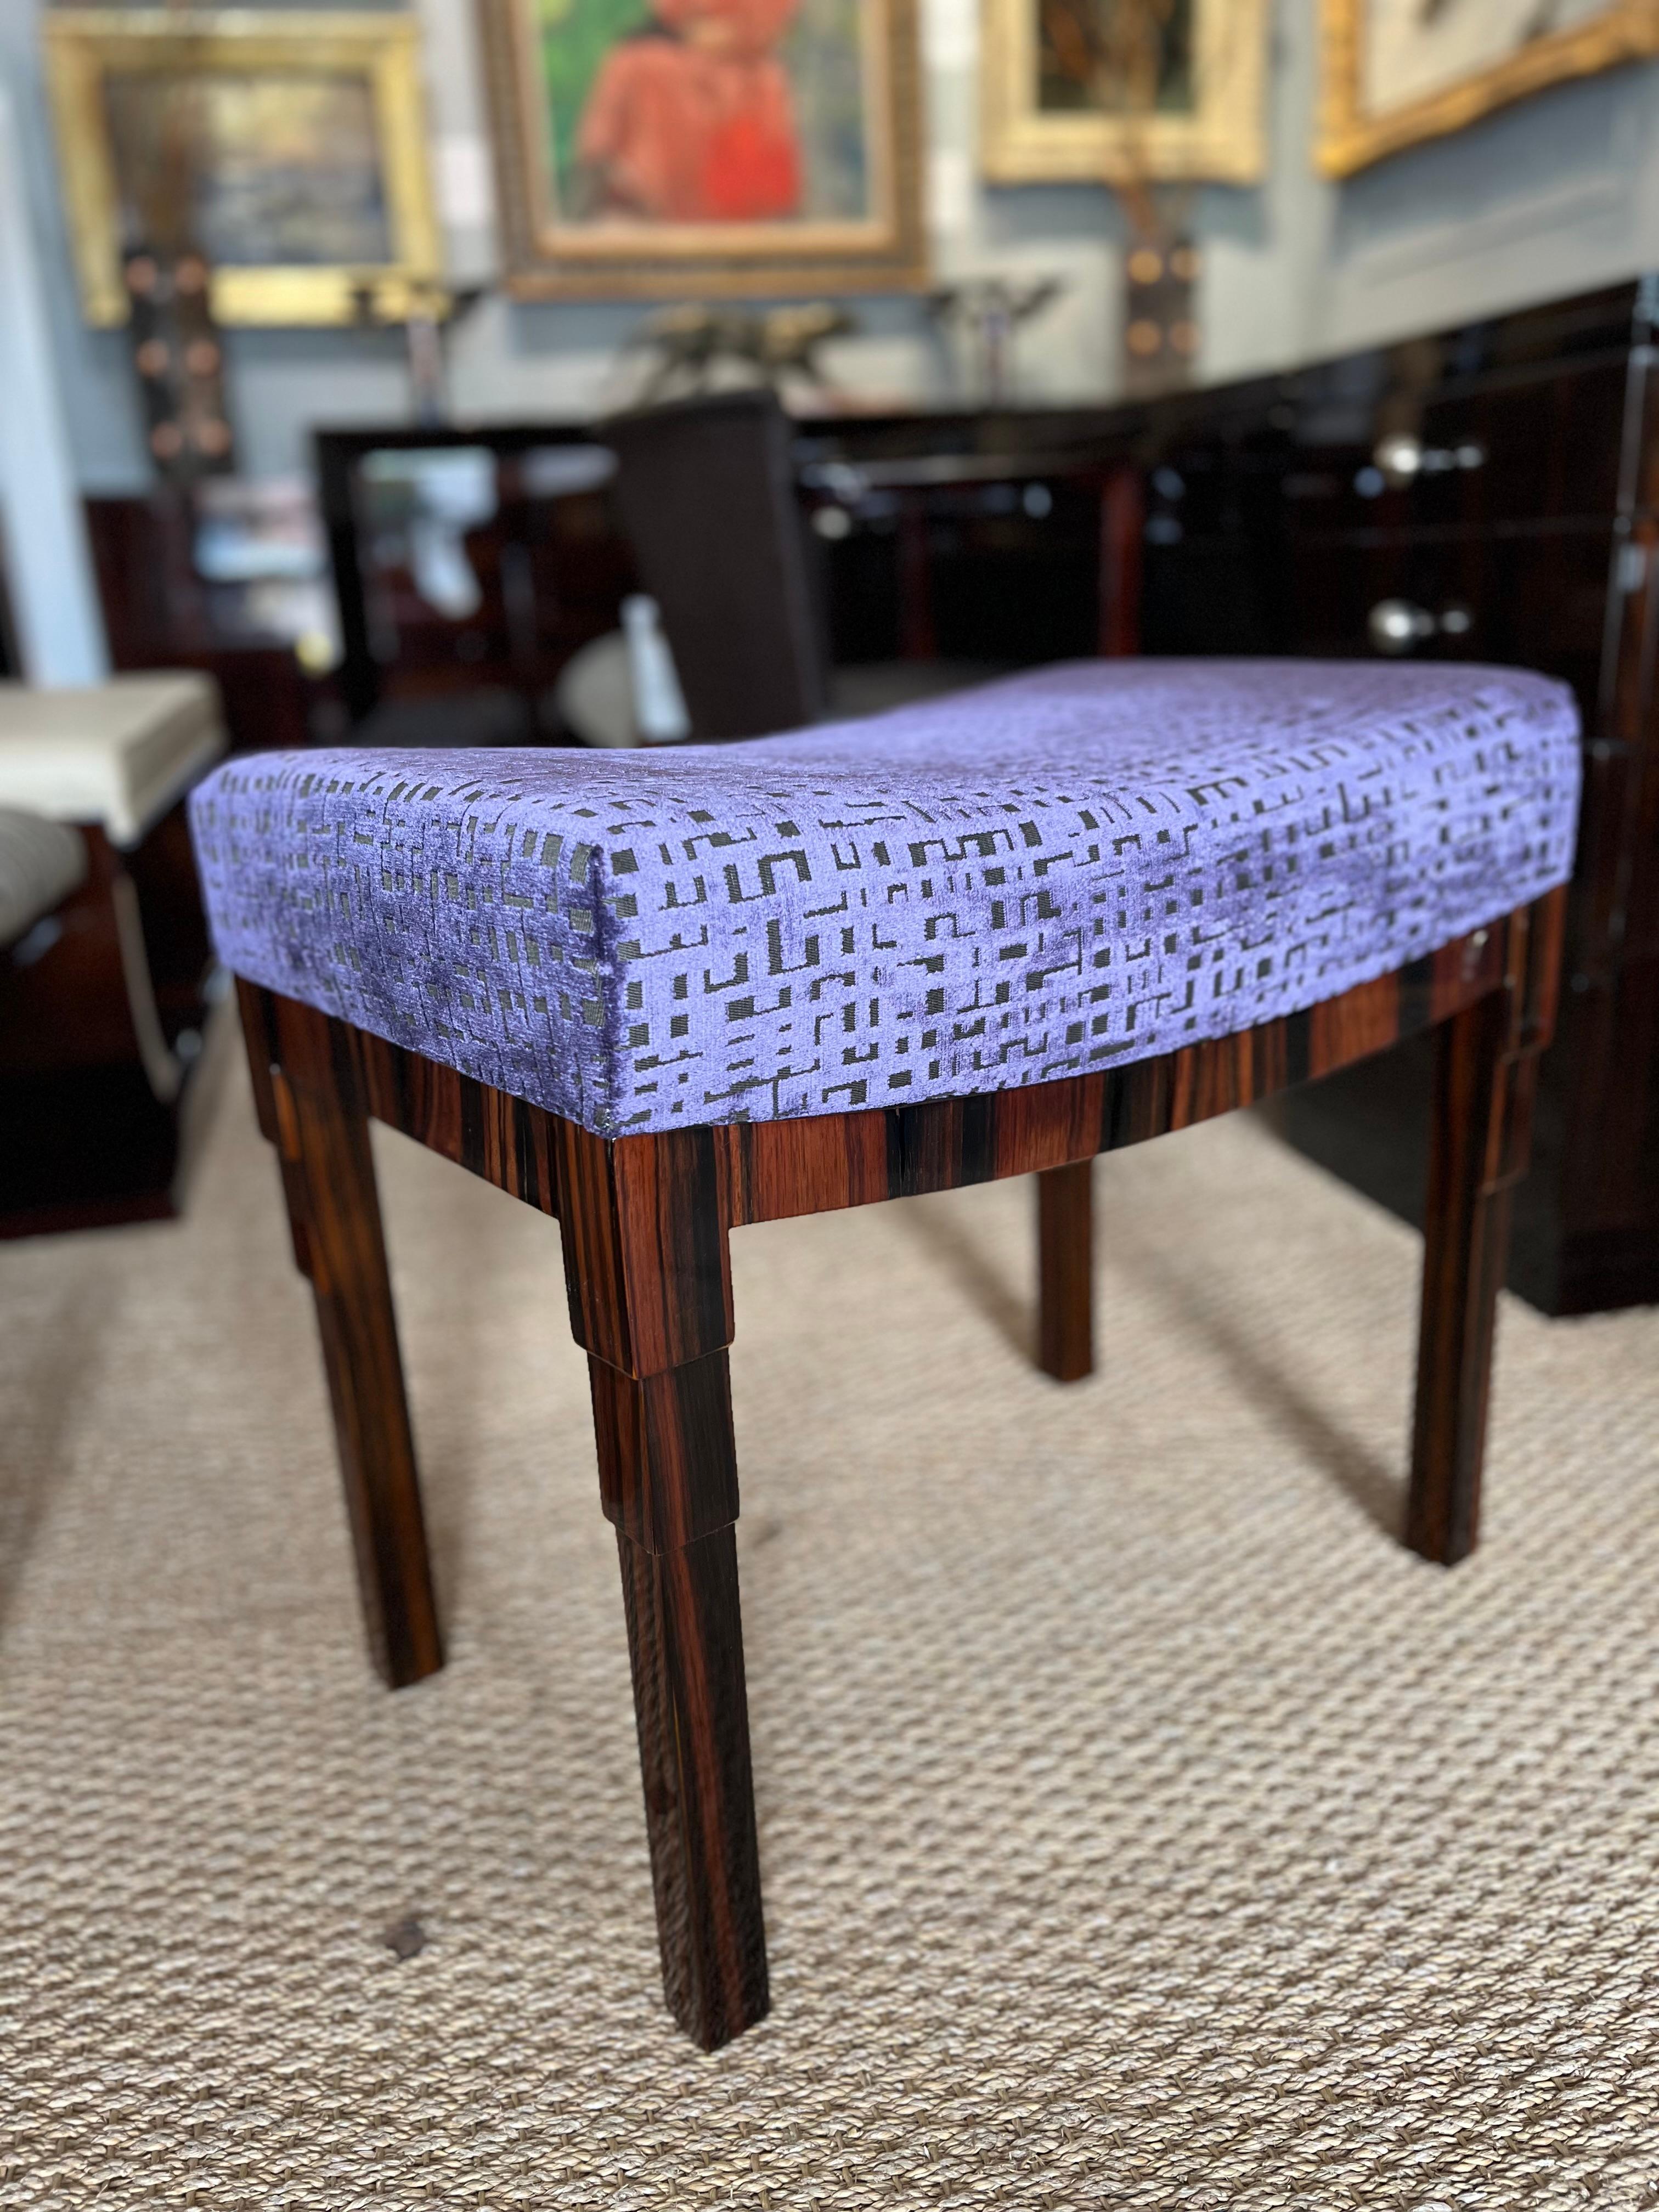 Art Deco Period French Ottoman is made out of Macassar night. Newly re-upholstered in velvety purple  fabric. Semi-curved seat is resting on 4 rectangular legs. 

France. c. 1930
Condition is perfect. Restored.
23.5